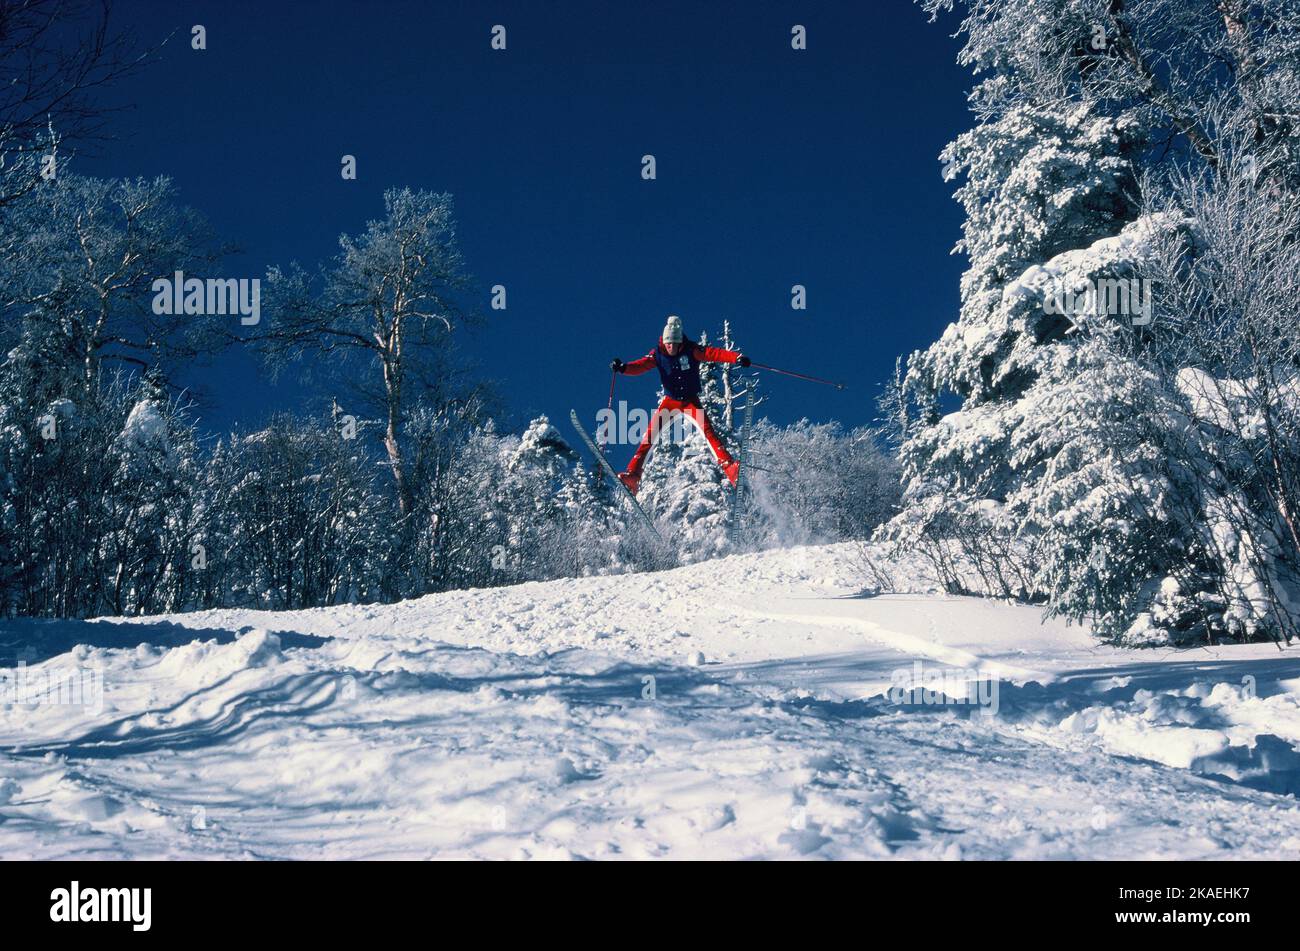 United States. Tree skiing man leaping mid-air. Stock Photo